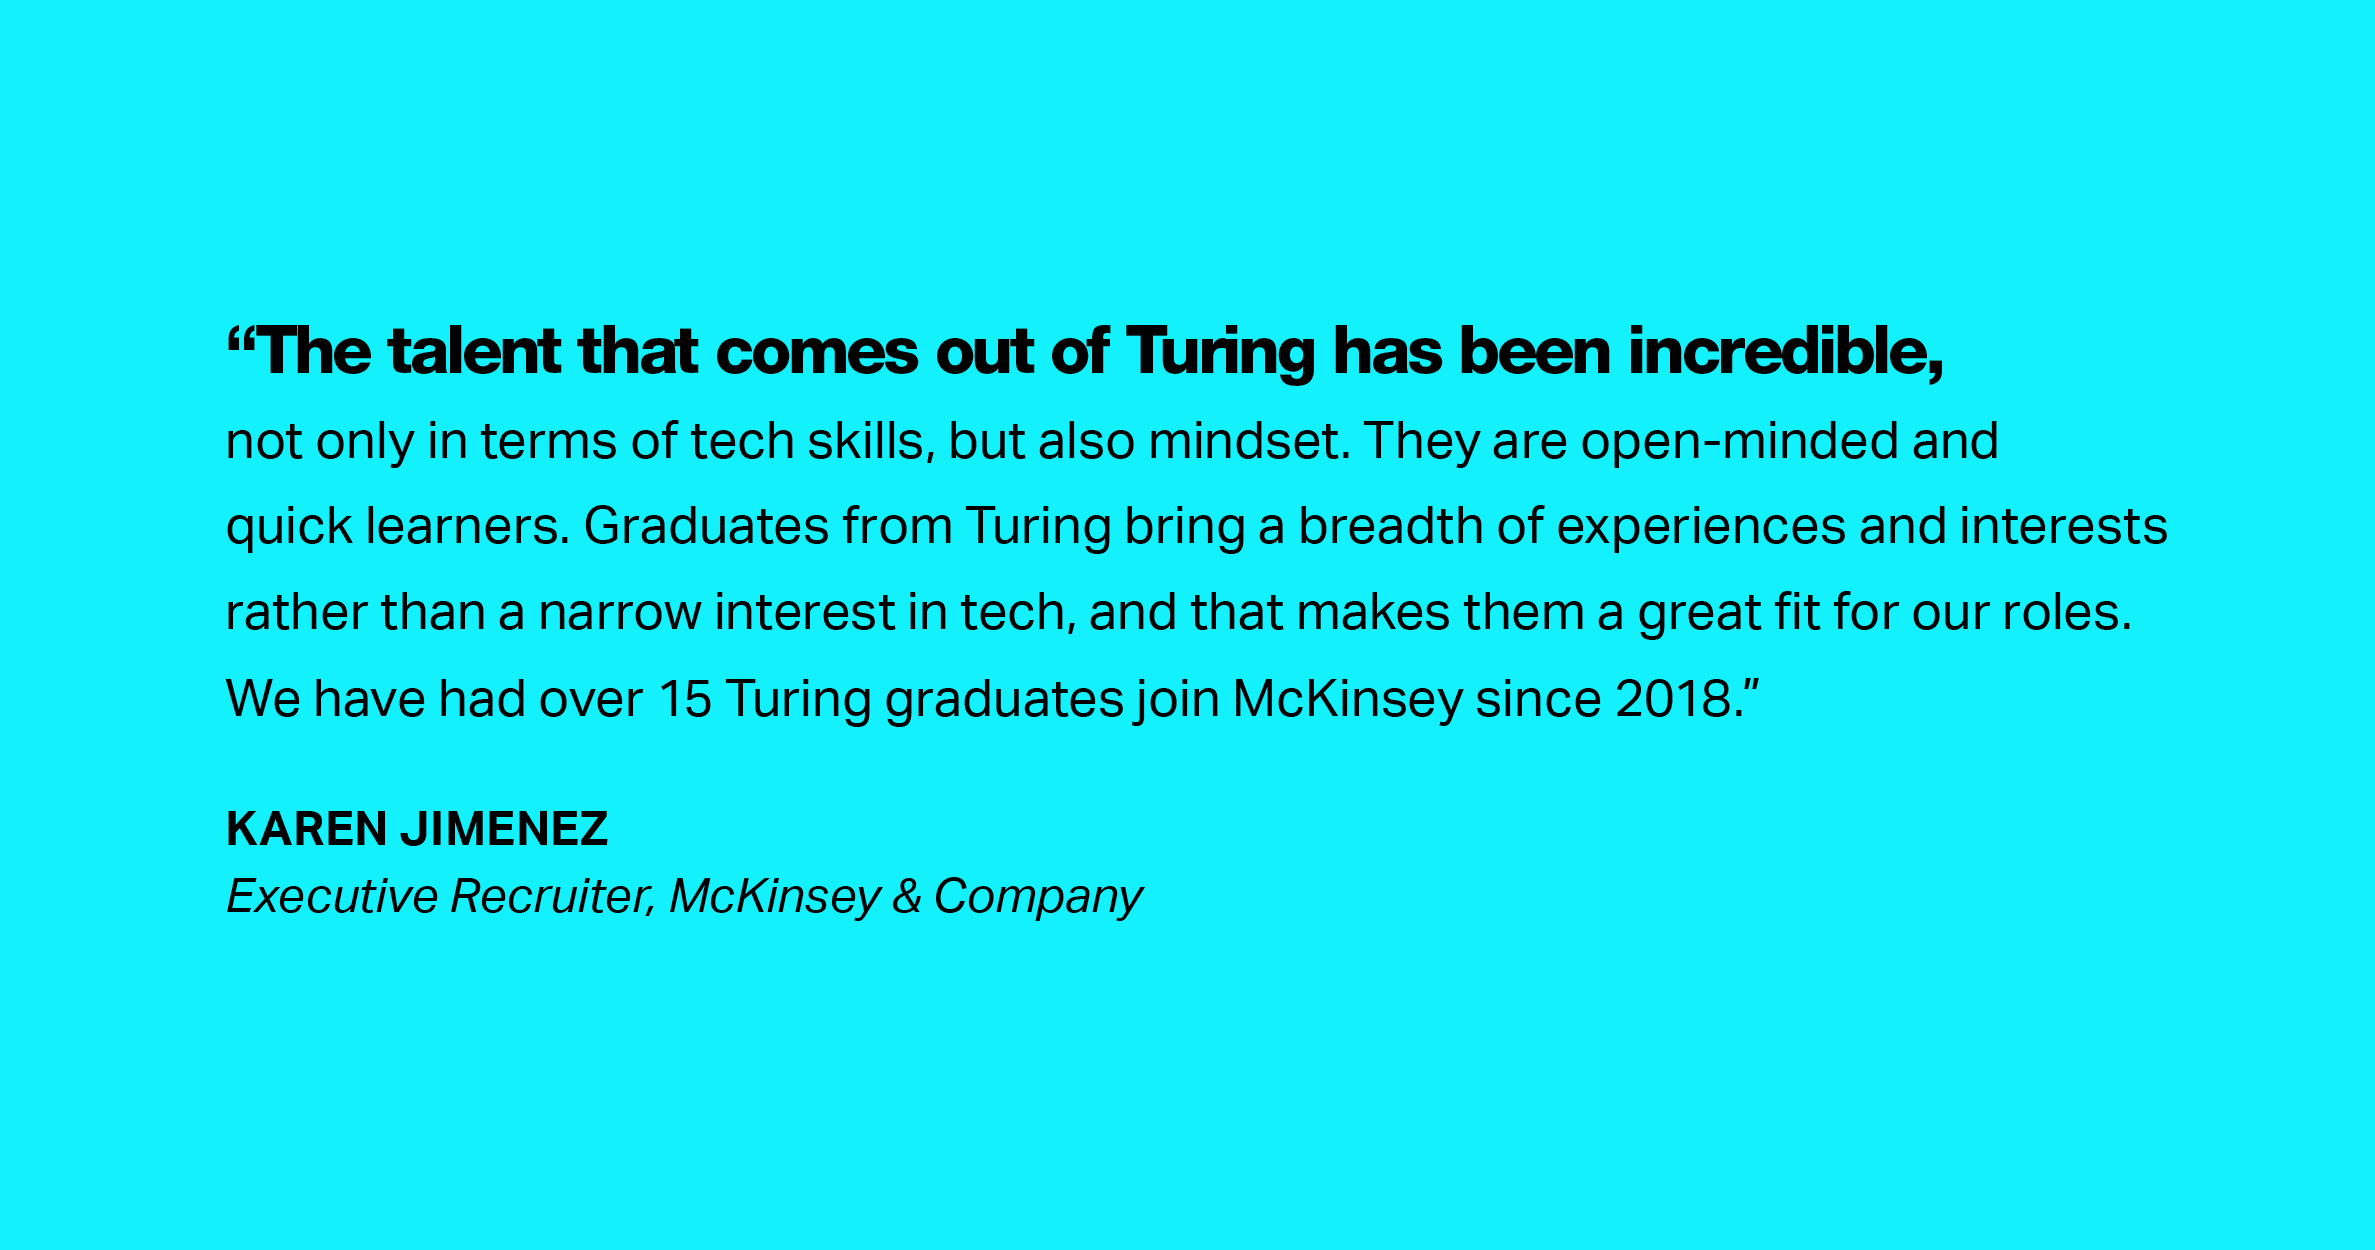 McKinsey Hires from Turing